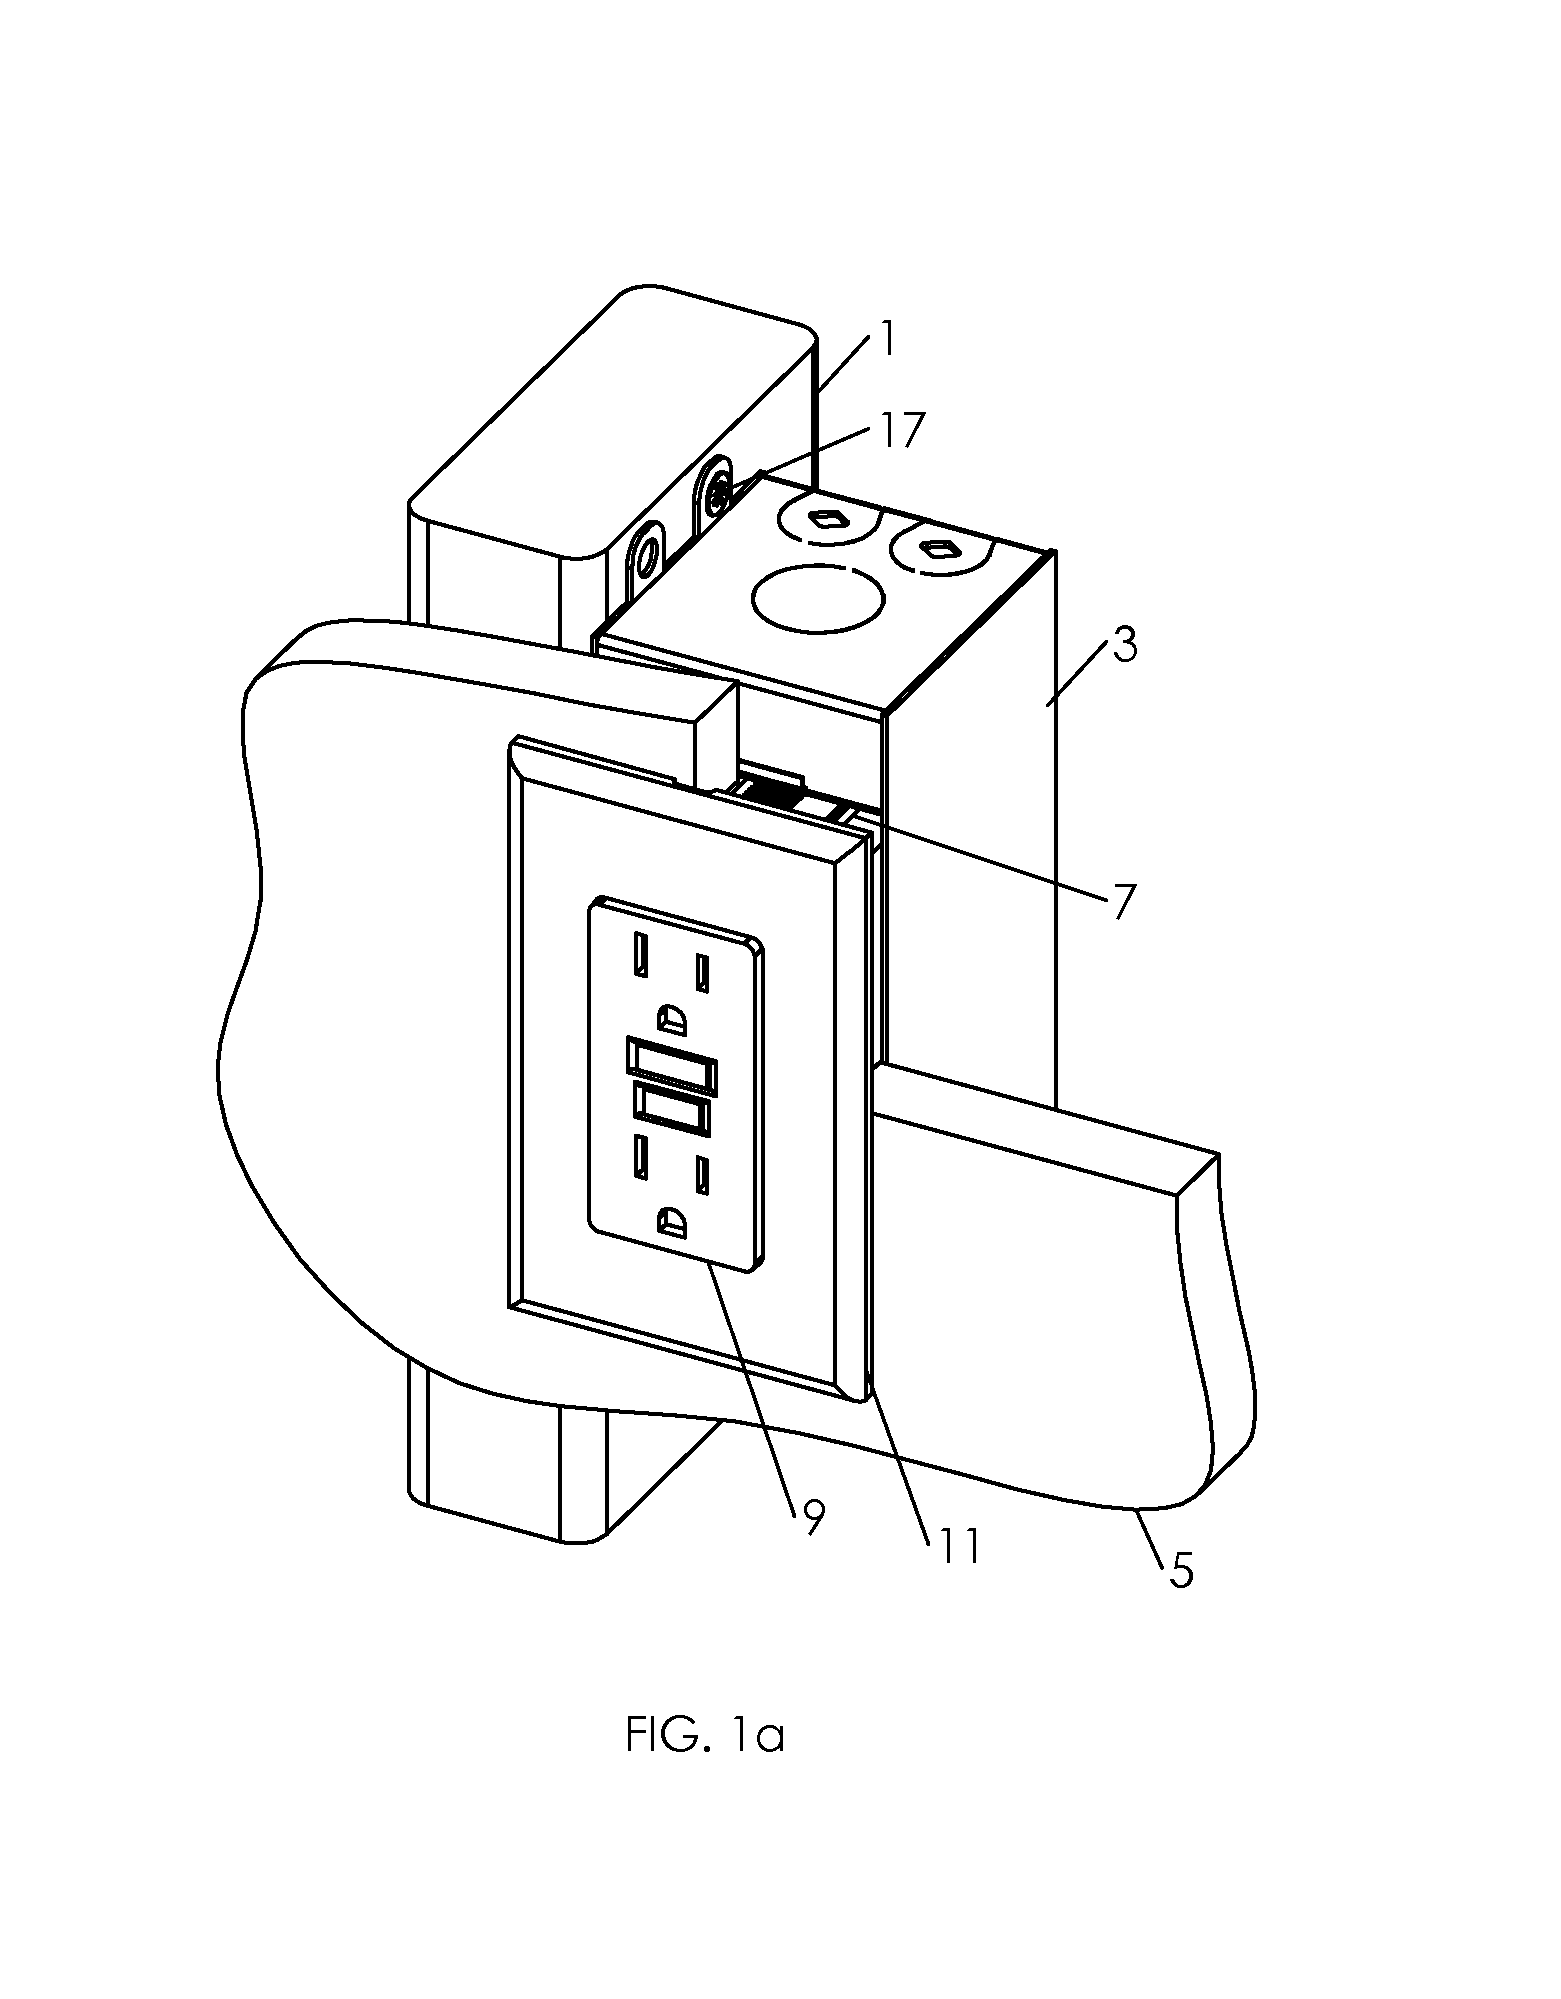 Electrical box and sleeve assembly